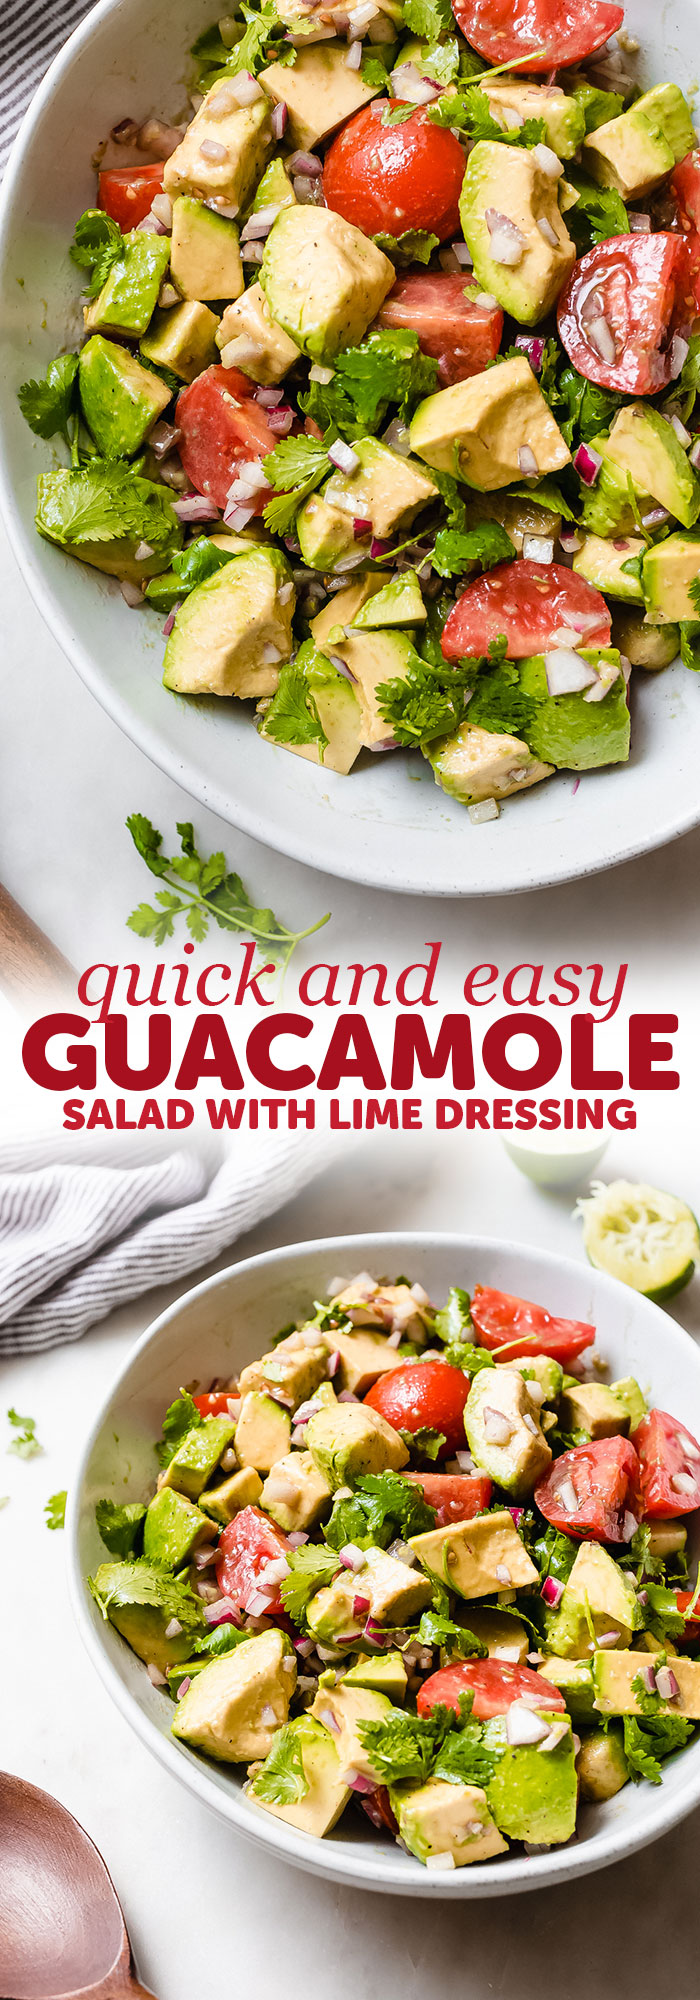 Easy Guacamole Salad - turn everyone's favorite dip into a salad! This avocado salad is sure to be a hit with everyone at potlucks, barbecues, or parties this summer! #summersalad #guacamole #guacamolesalad #deconstructedguacamolesalad #avocadosalad #tomatoavocadosalad | Littlespicejar.com